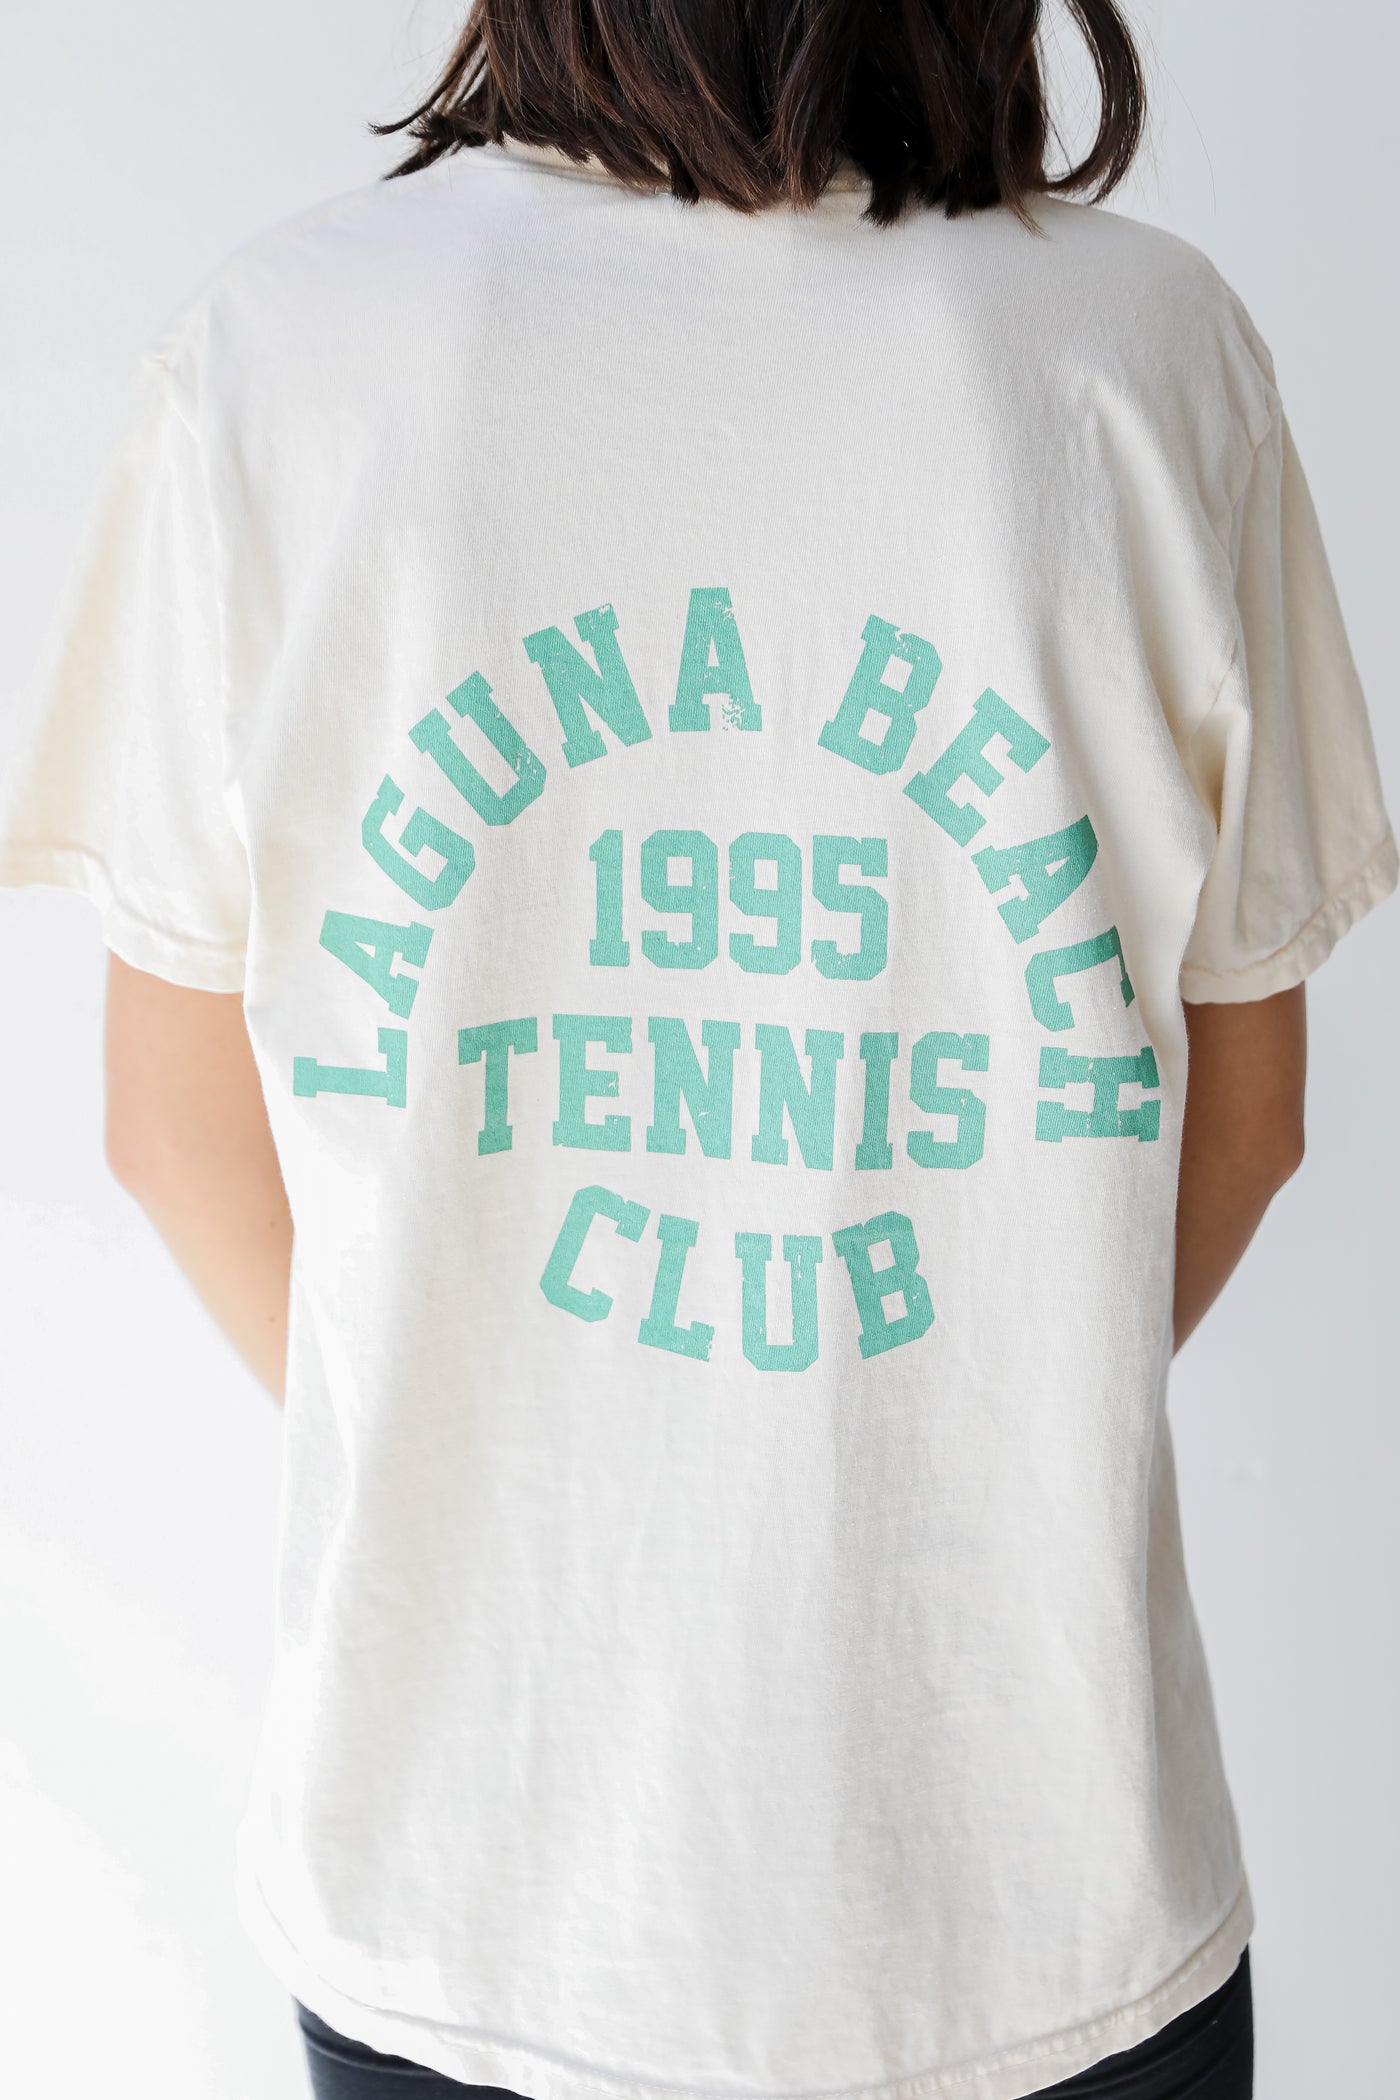 Tennis Ball Society Graphic Tee from dress up